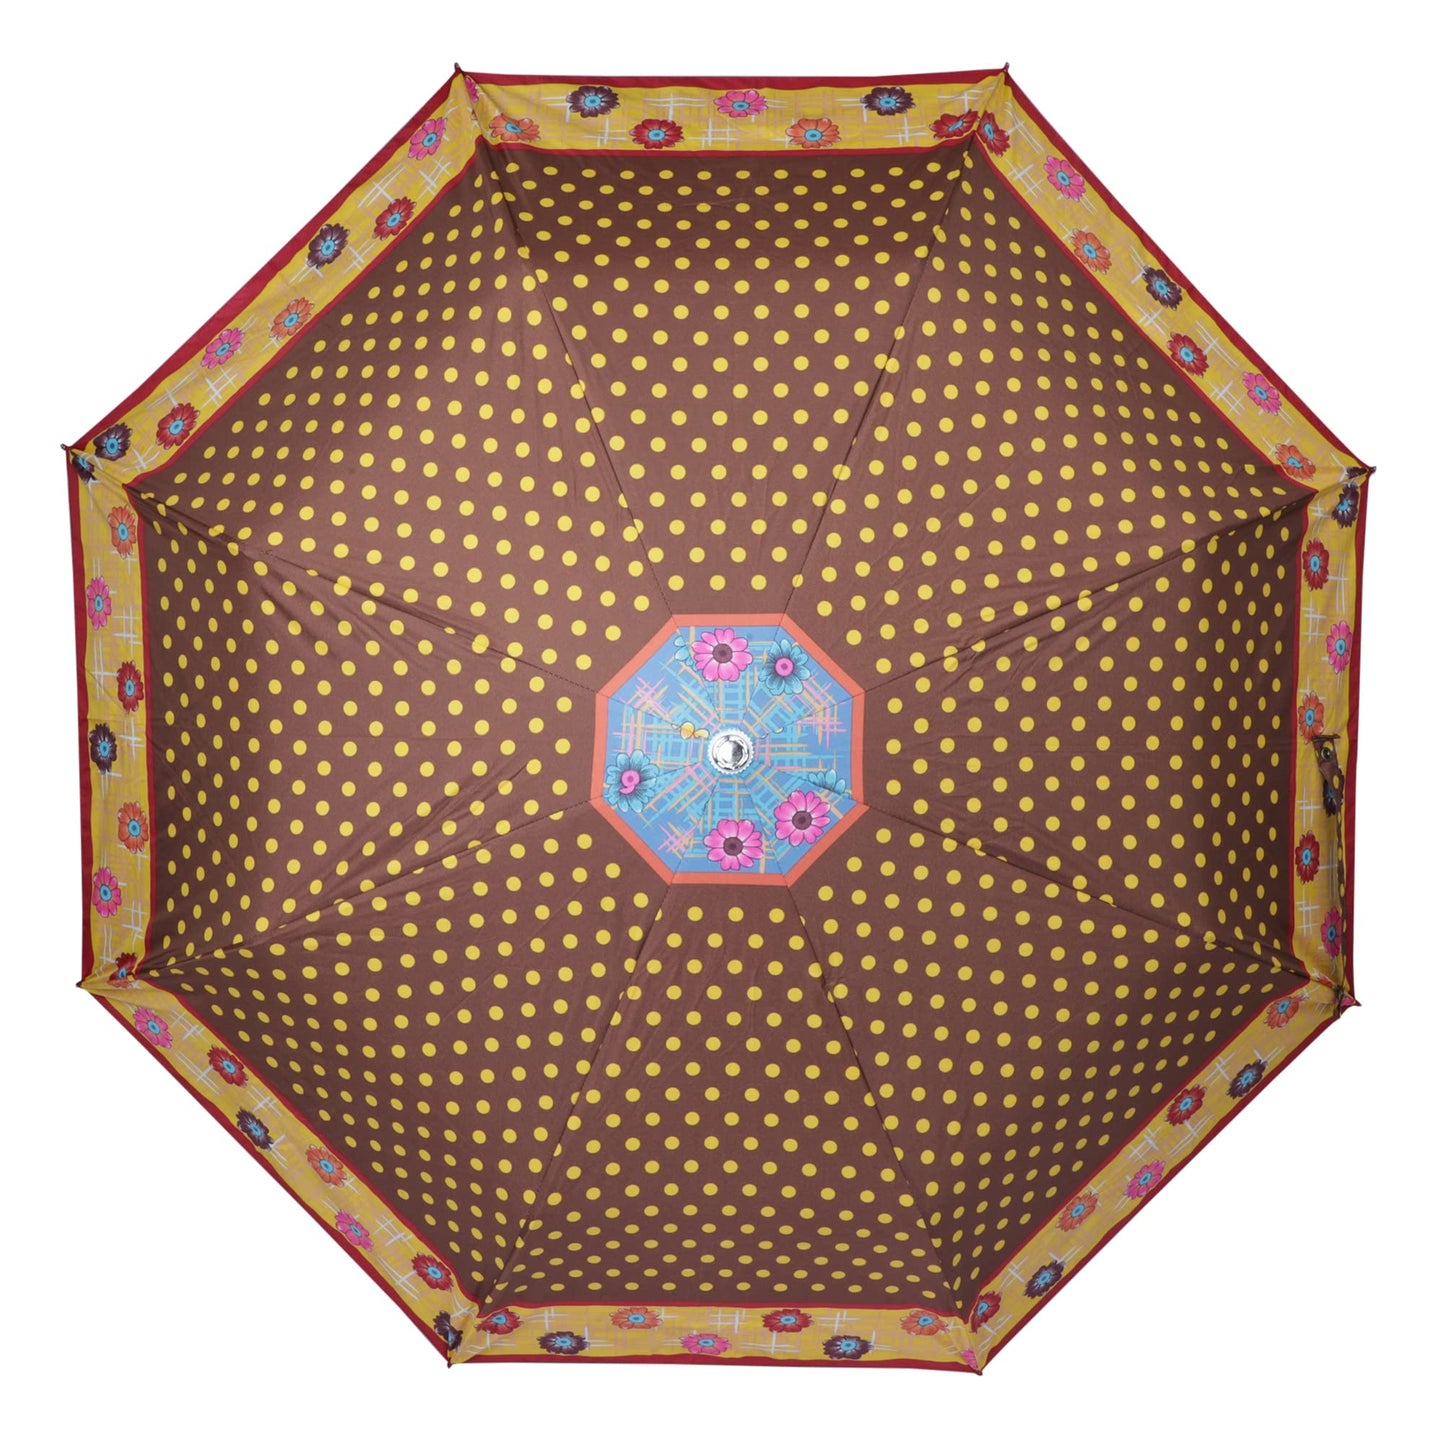 THE CLOWNFISH Umbrella Polka Dot Series 3 Fold Auto Open Waterproof Water Repellent Nylon Double Coated Silver Lined Umbrellas For Men and Women (Brown with yellow border)